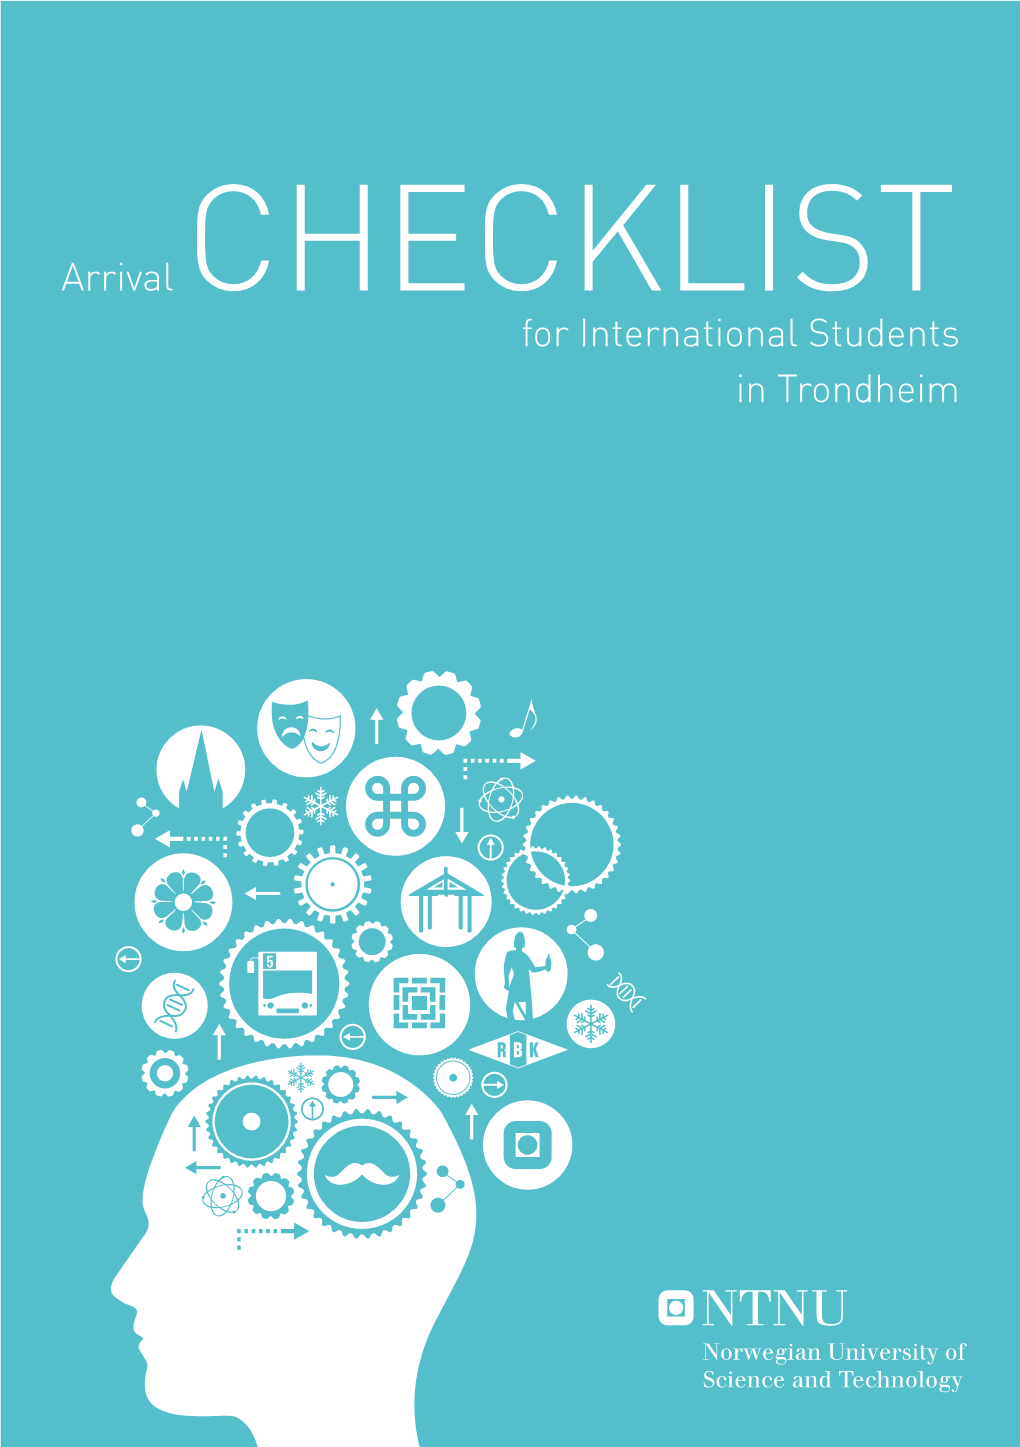 Arrival CHECKLIST for International Students in Trondheim KEEP CALM and READ the CHECKLIST